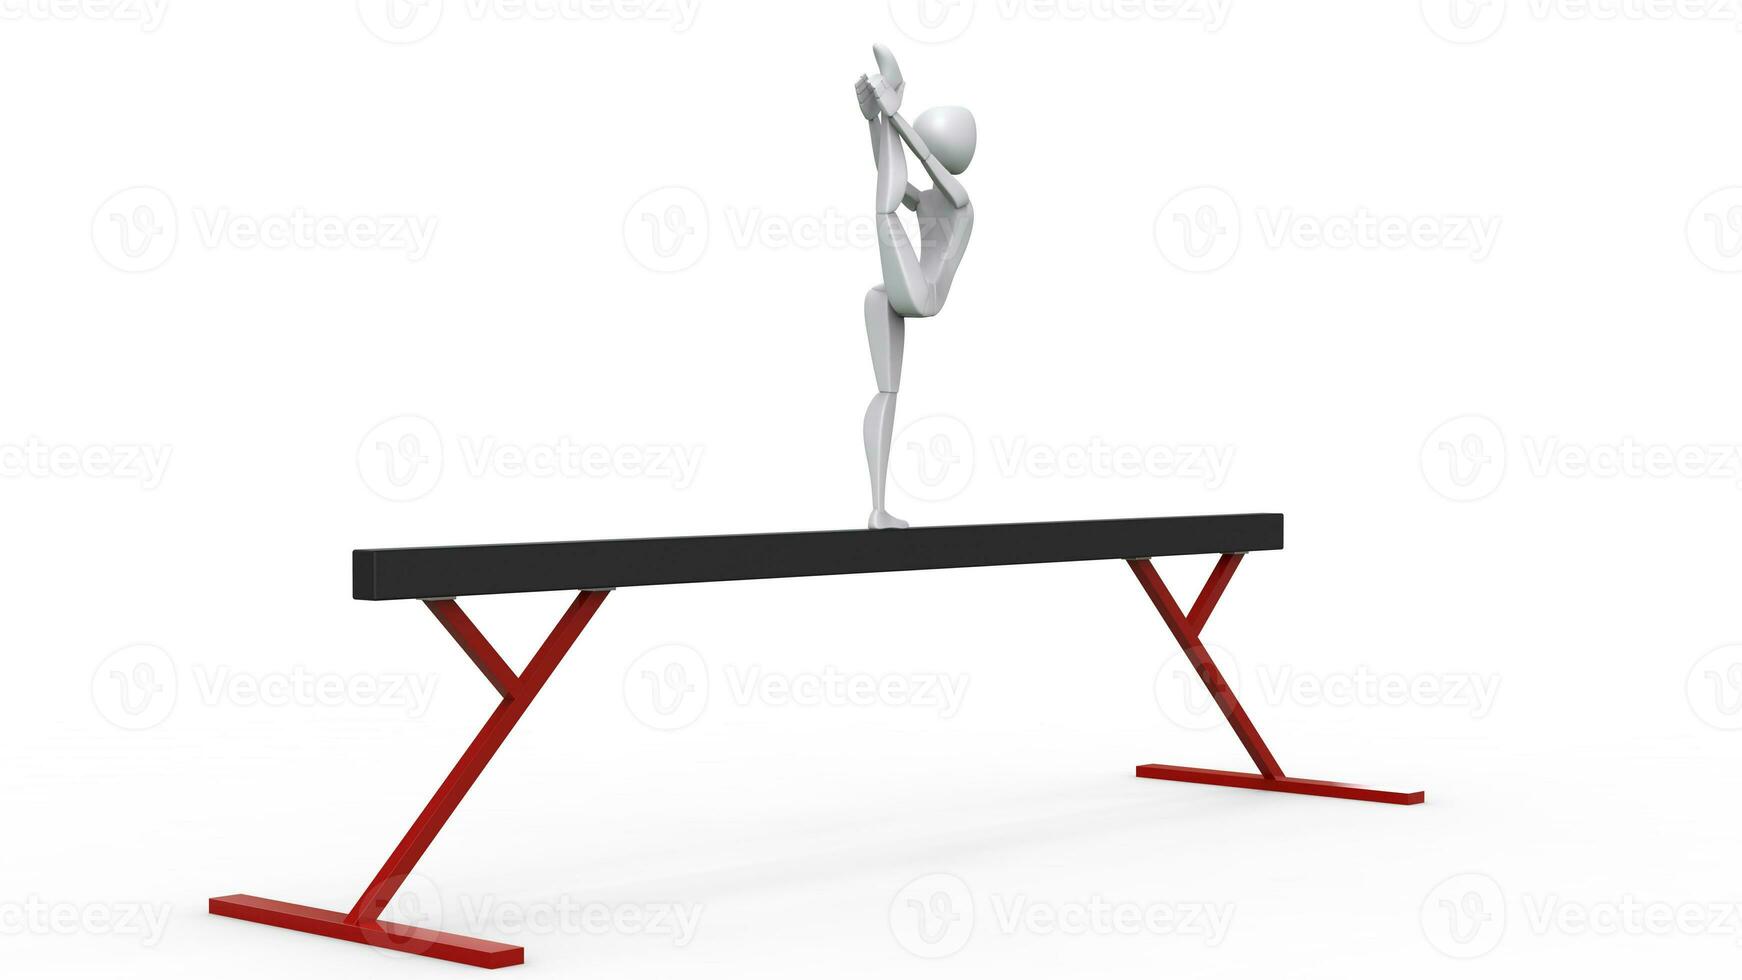 Gymnast performing one leg stand on balance beam - back view - 3D Illustration photo